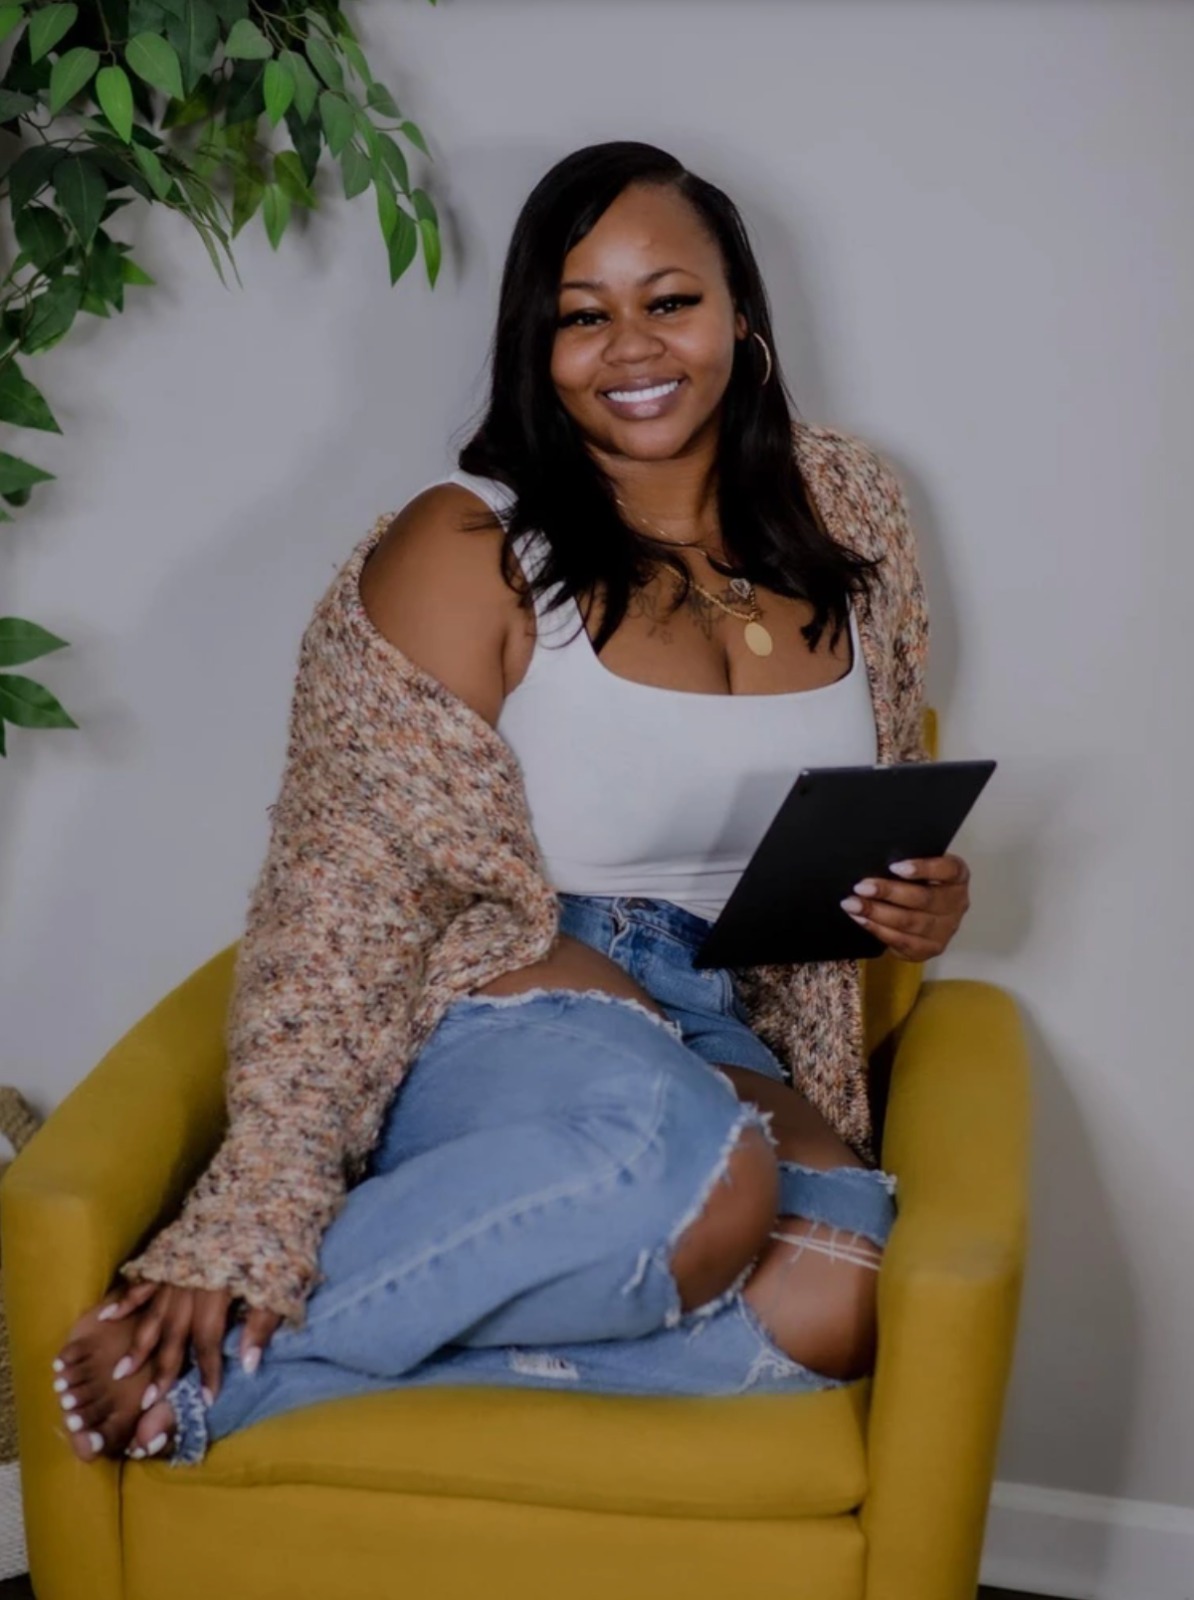 Meet Young Kelly Watson, An African American Woman Who Made Her Way To 100k A Season Through Her Tax Preparation Business